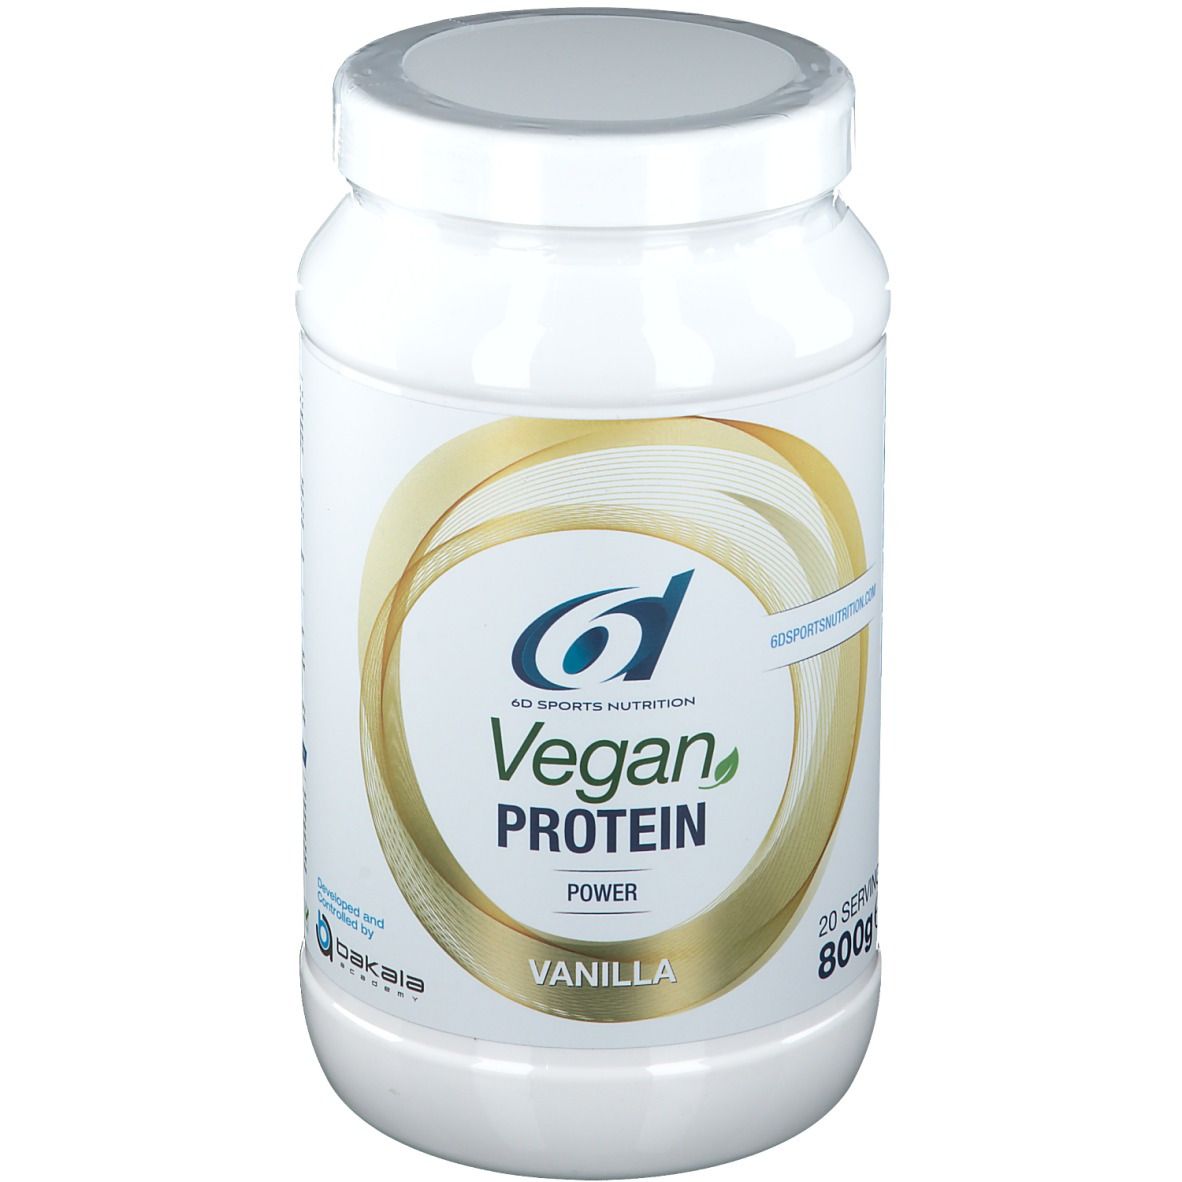 Image of 6D sports Nutrition Vegan Protein Vanille